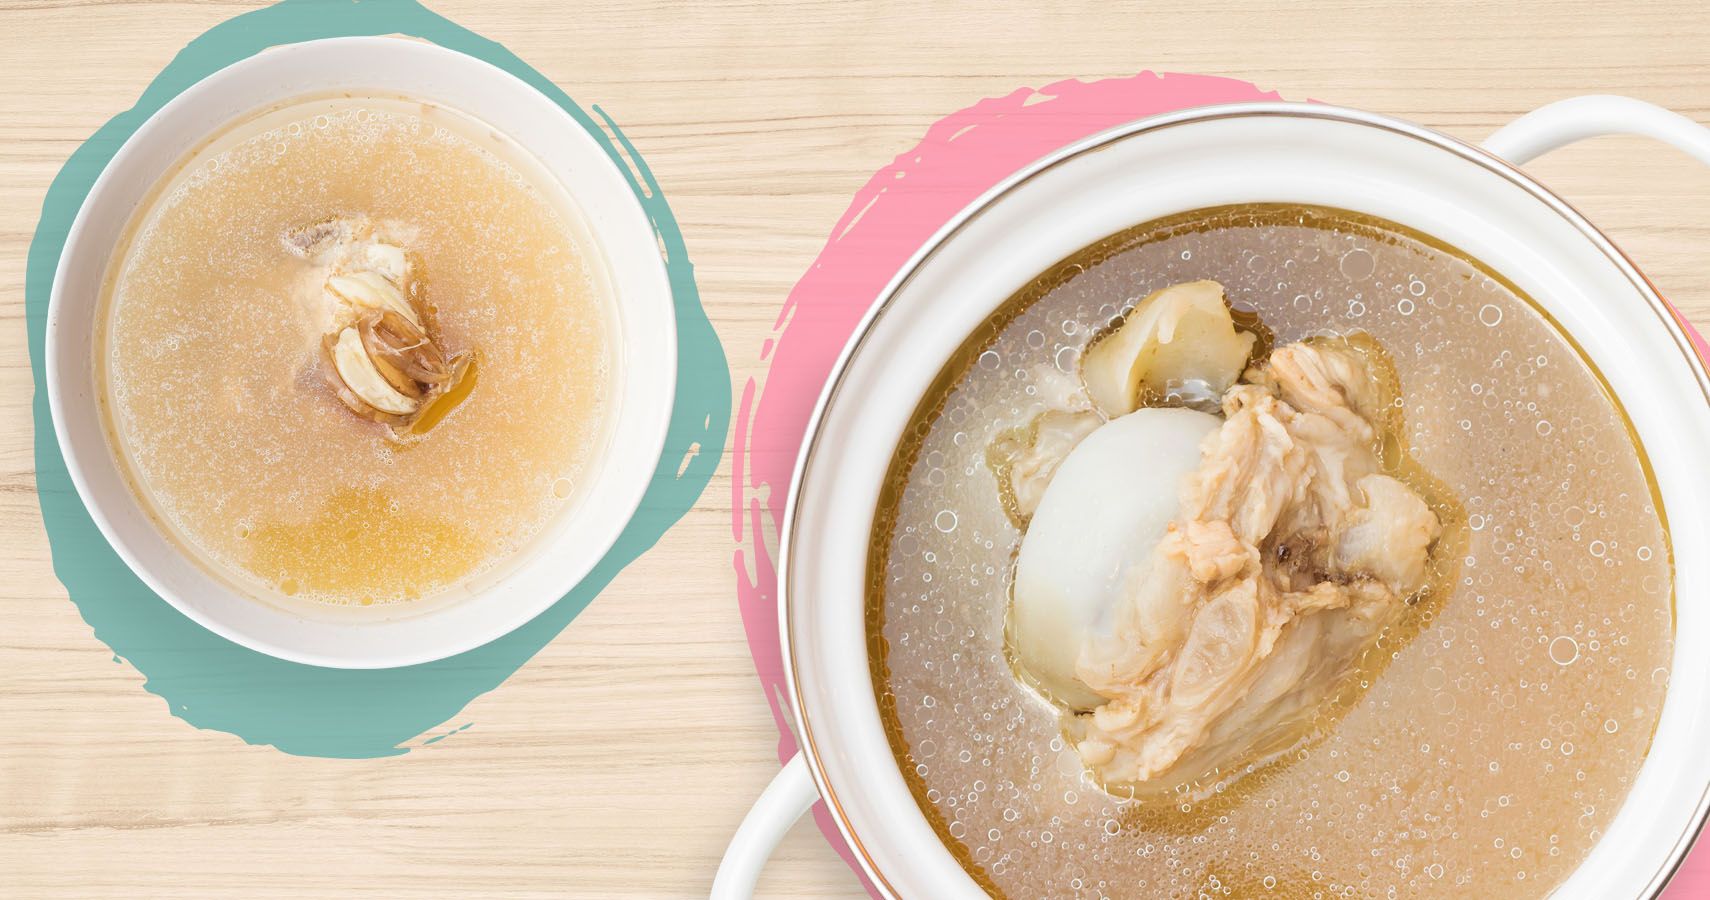 What Are The Health Benefits Of Bone Broth For My Family?